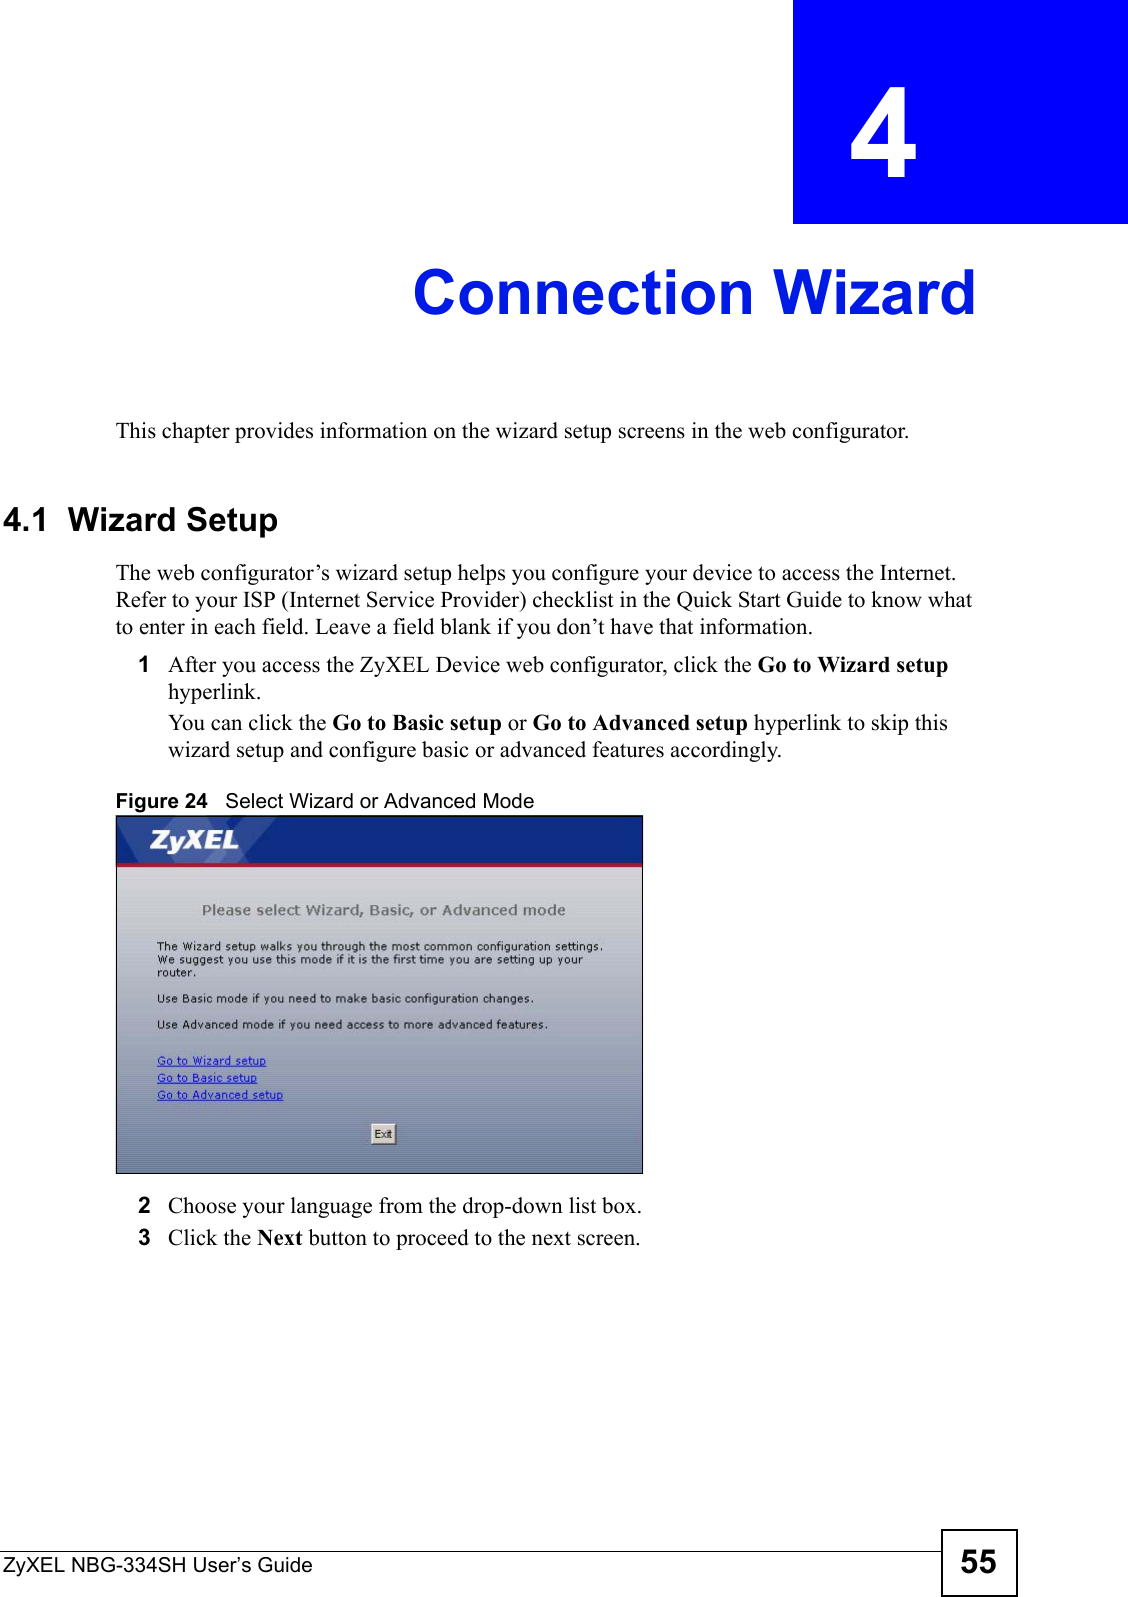 ZyXEL NBG-334SH User’s Guide 55CHAPTER  4 Connection WizardThis chapter provides information on the wizard setup screens in the web configurator.4.1  Wizard SetupThe web configurator’s wizard setup helps you configure your device to access the Internet. Refer to your ISP (Internet Service Provider) checklist in the Quick Start Guide to know what to enter in each field. Leave a field blank if you don’t have that information.1After you access the ZyXEL Device web configurator, click the Go to Wizard setup hyperlink.You can click the Go to Basic setup or Go to Advanced setup hyperlink to skip this wizard setup and configure basic or advanced features accordingly.Figure 24   Select Wizard or Advanced Mode2Choose your language from the drop-down list box.3Click the Next button to proceed to the next screen.